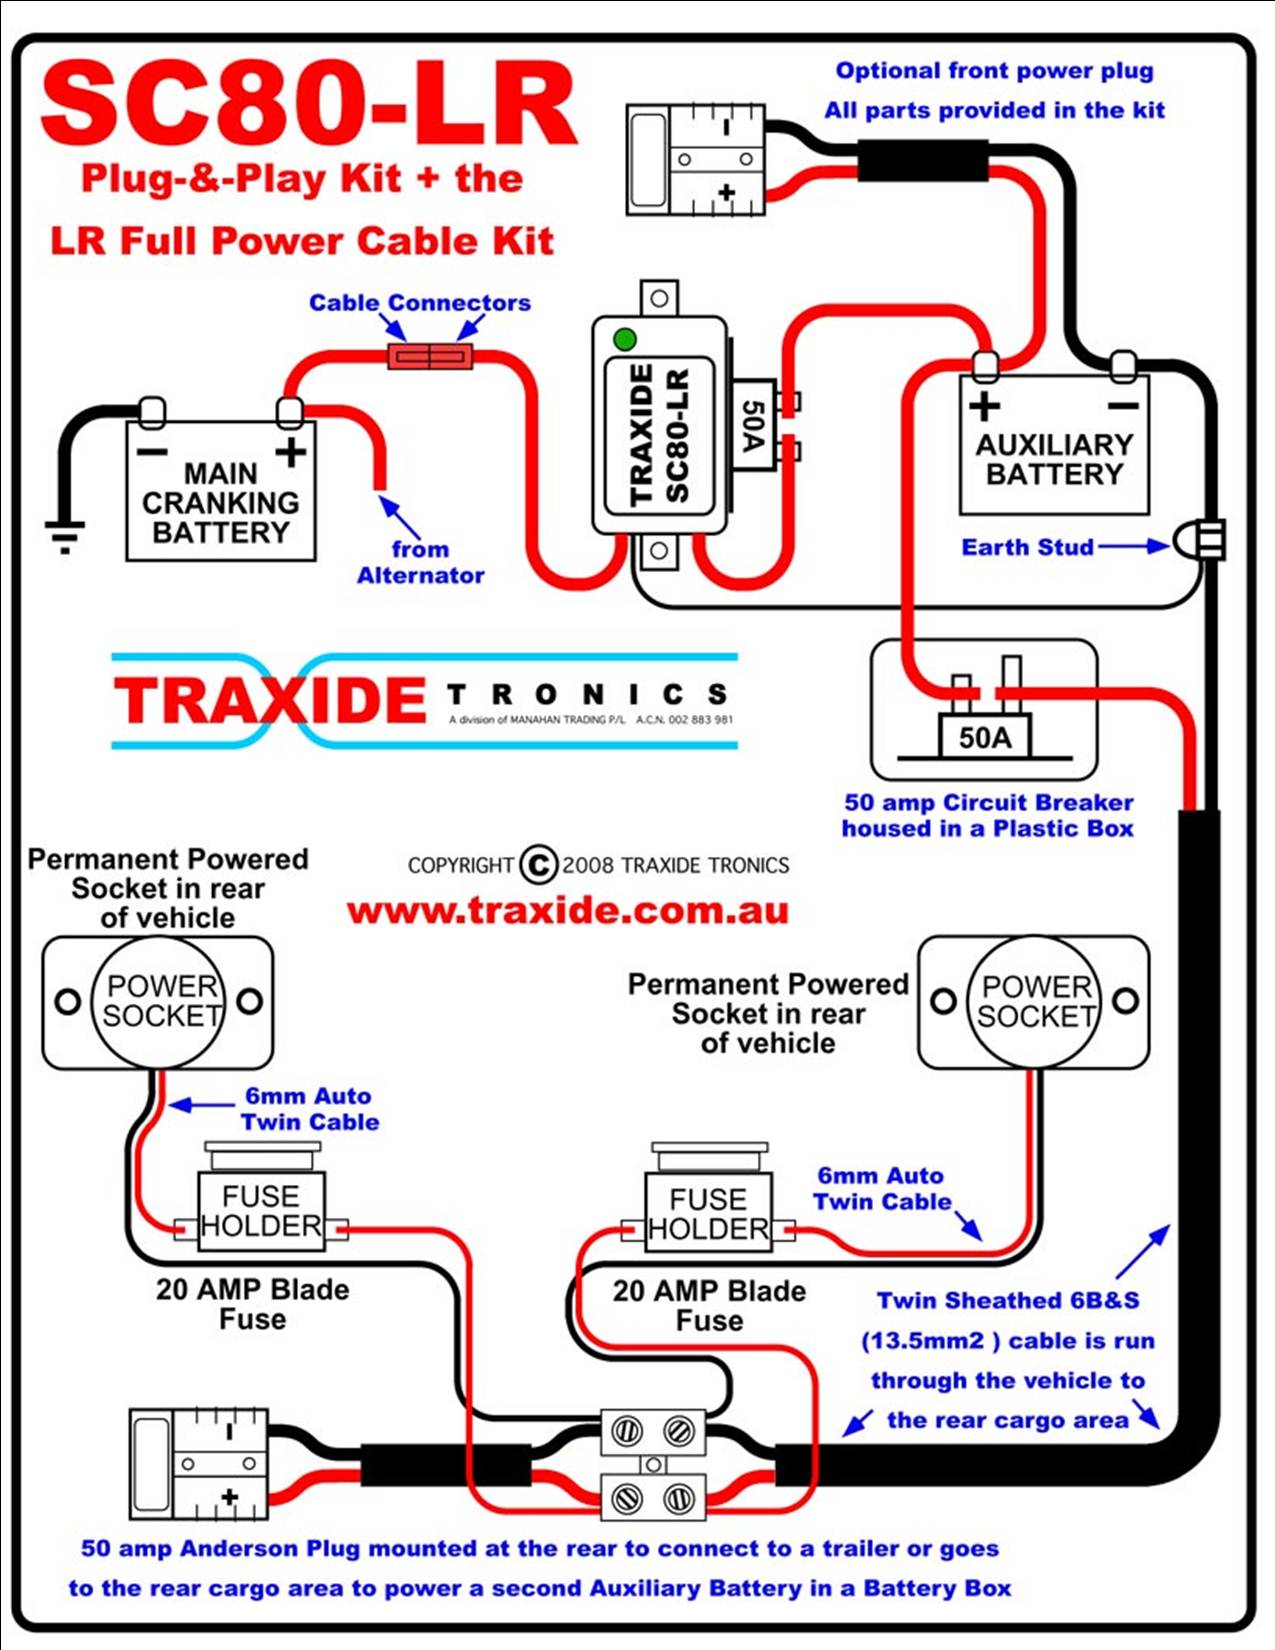 50 Amp Anderson Plug Wiring Diagram from 4x4earth.com